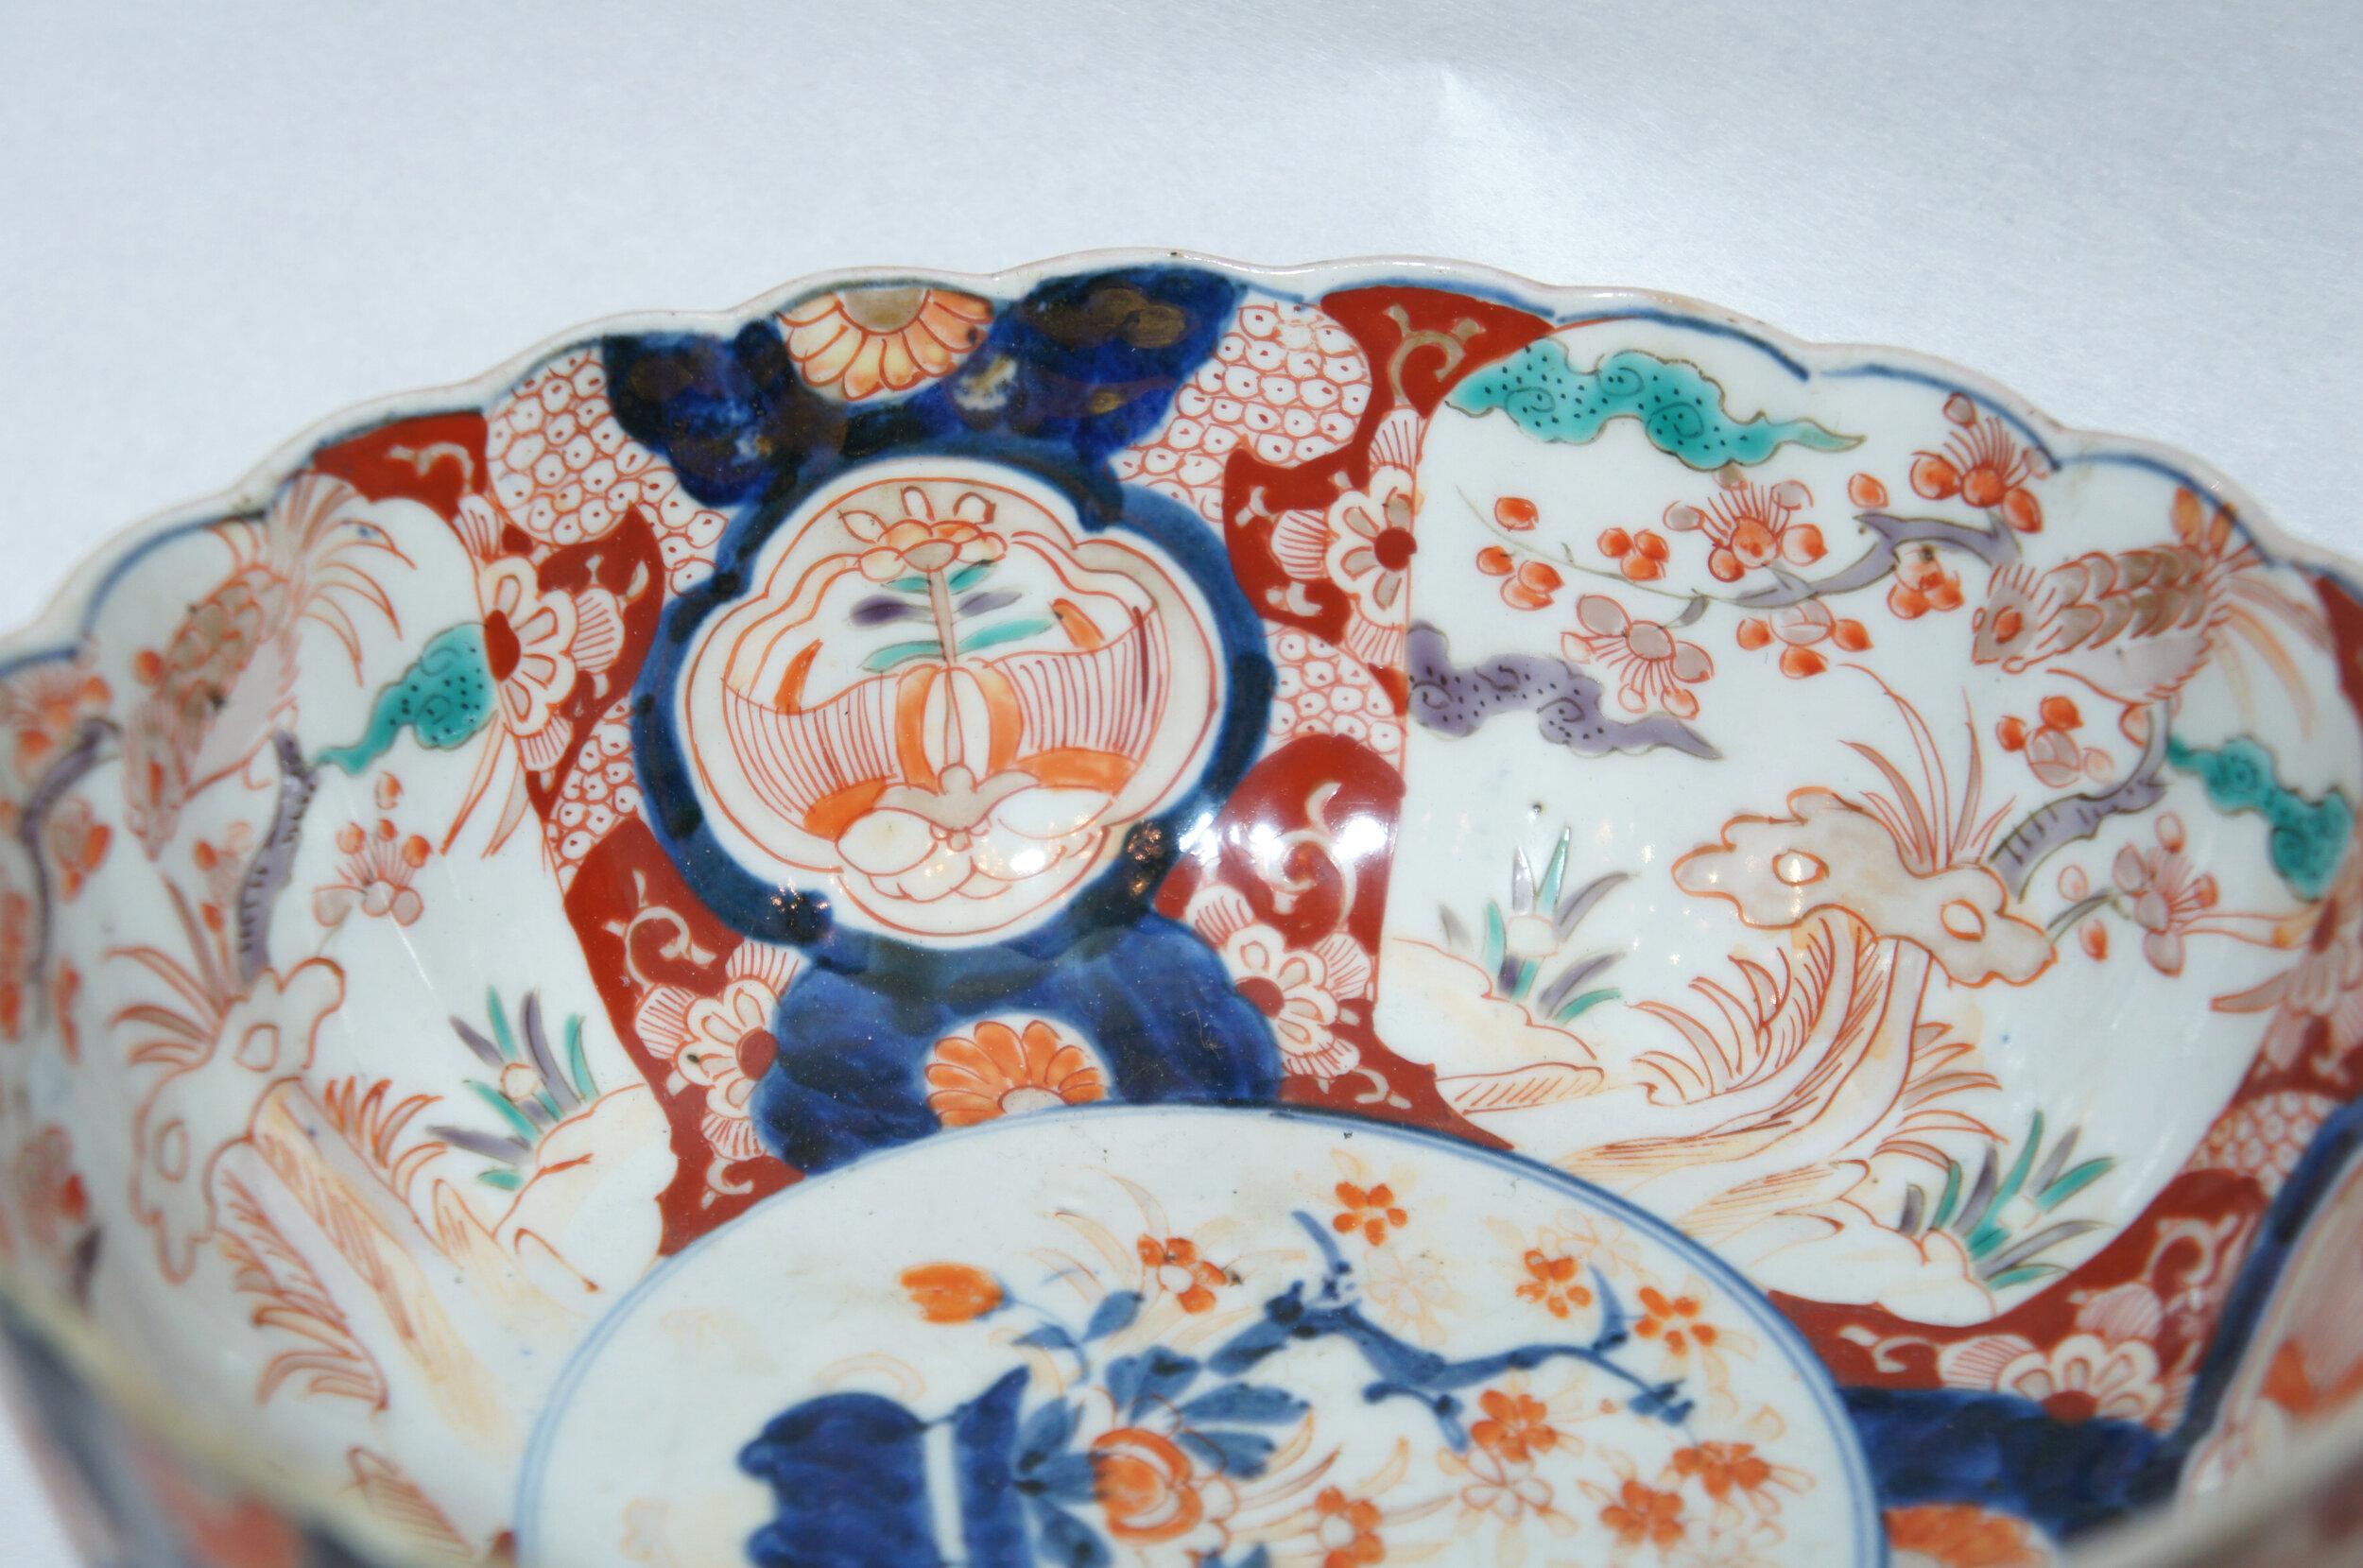 This serving bowl is made with porcelain and it was made in Japan around 1900s in Meiji era.
It is all hand painted. It was made in south of Japan with Imari style (Imari ware).

Dimensions:
21 x 21 x H9 cm

Imari ware is a Western term for a